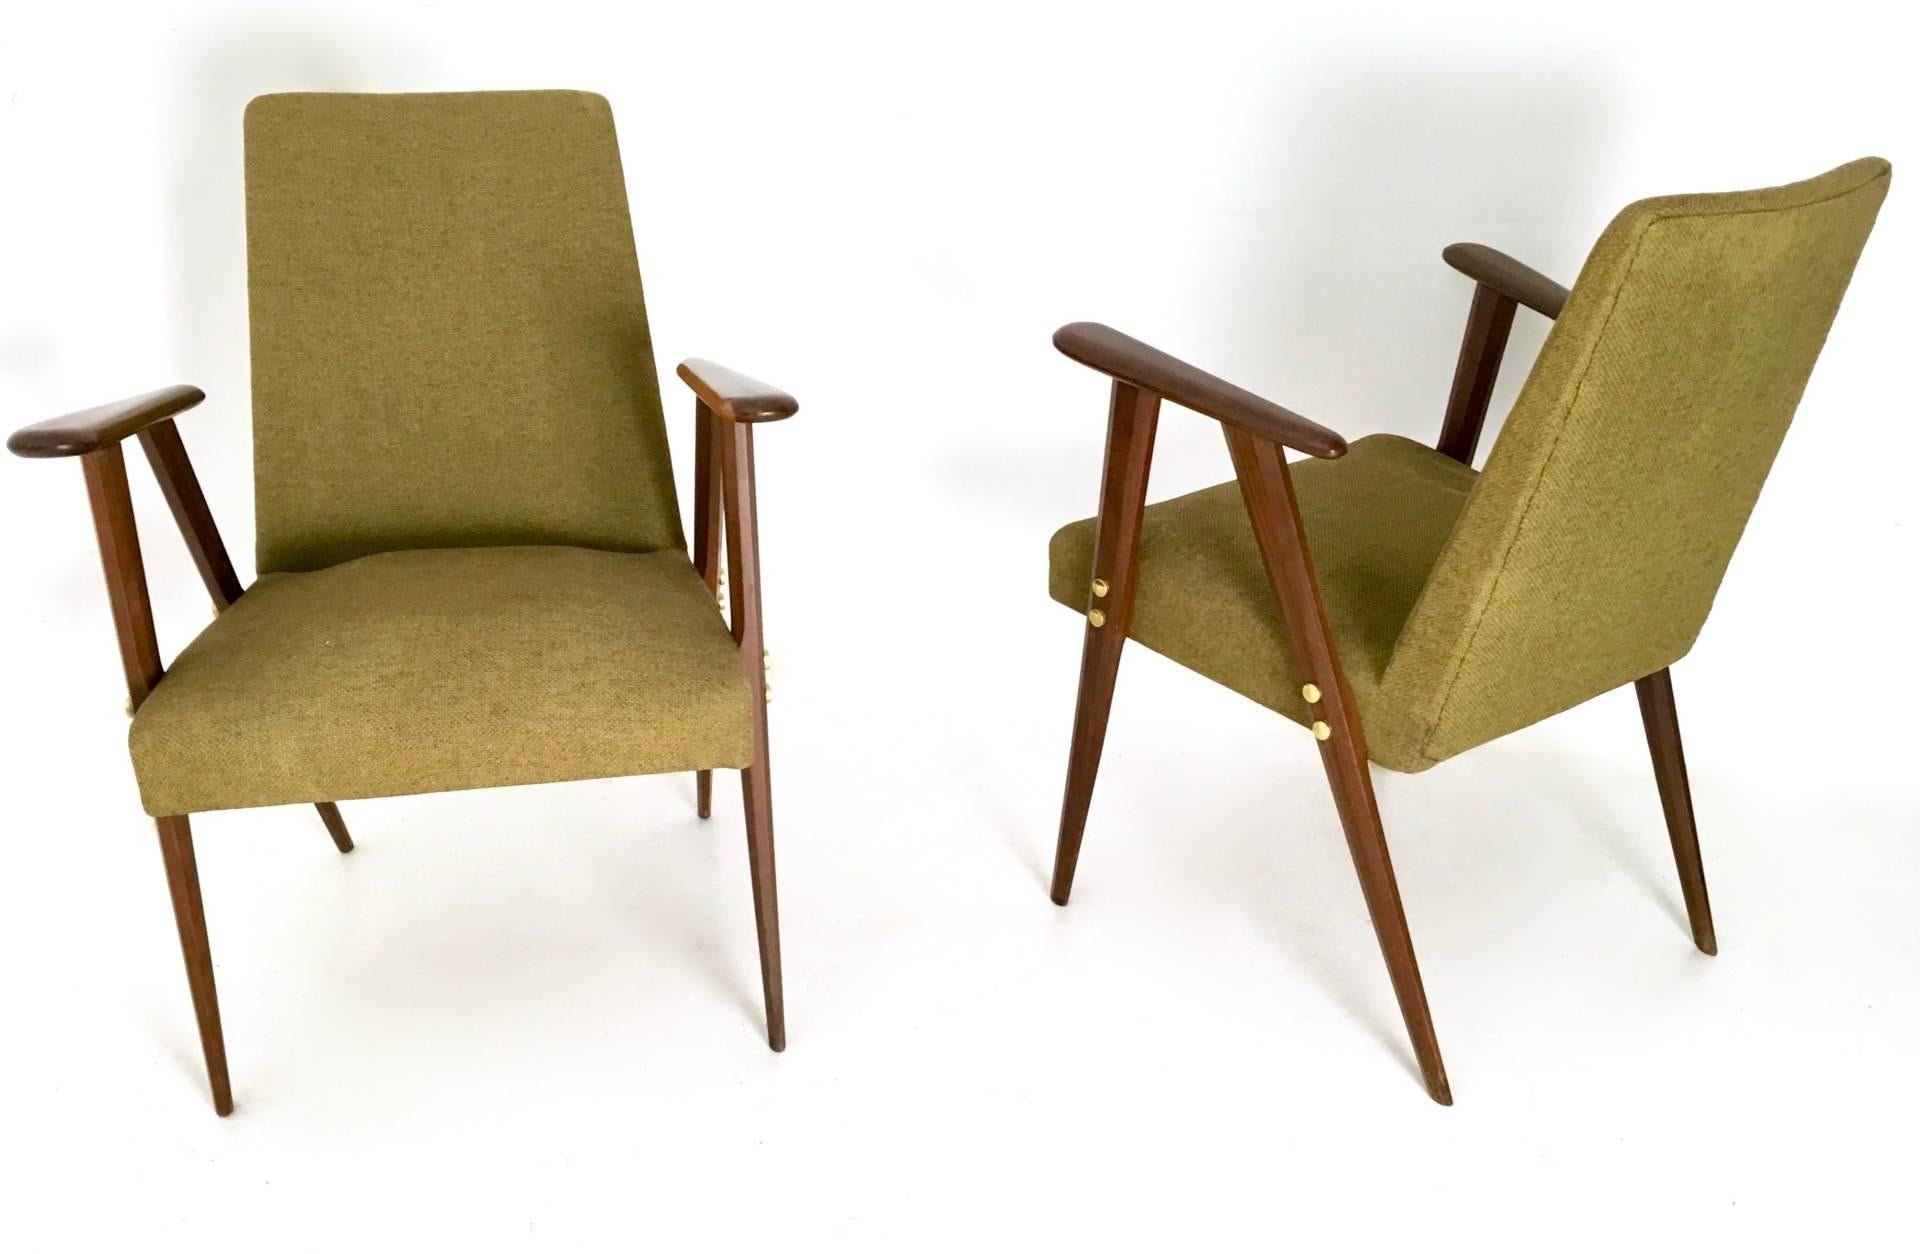 This pair of armchairs features a wooden structure and brass parts. 
The padding is upholstered in fabric. 
In excellent original condition and ready to become a piece in a home.